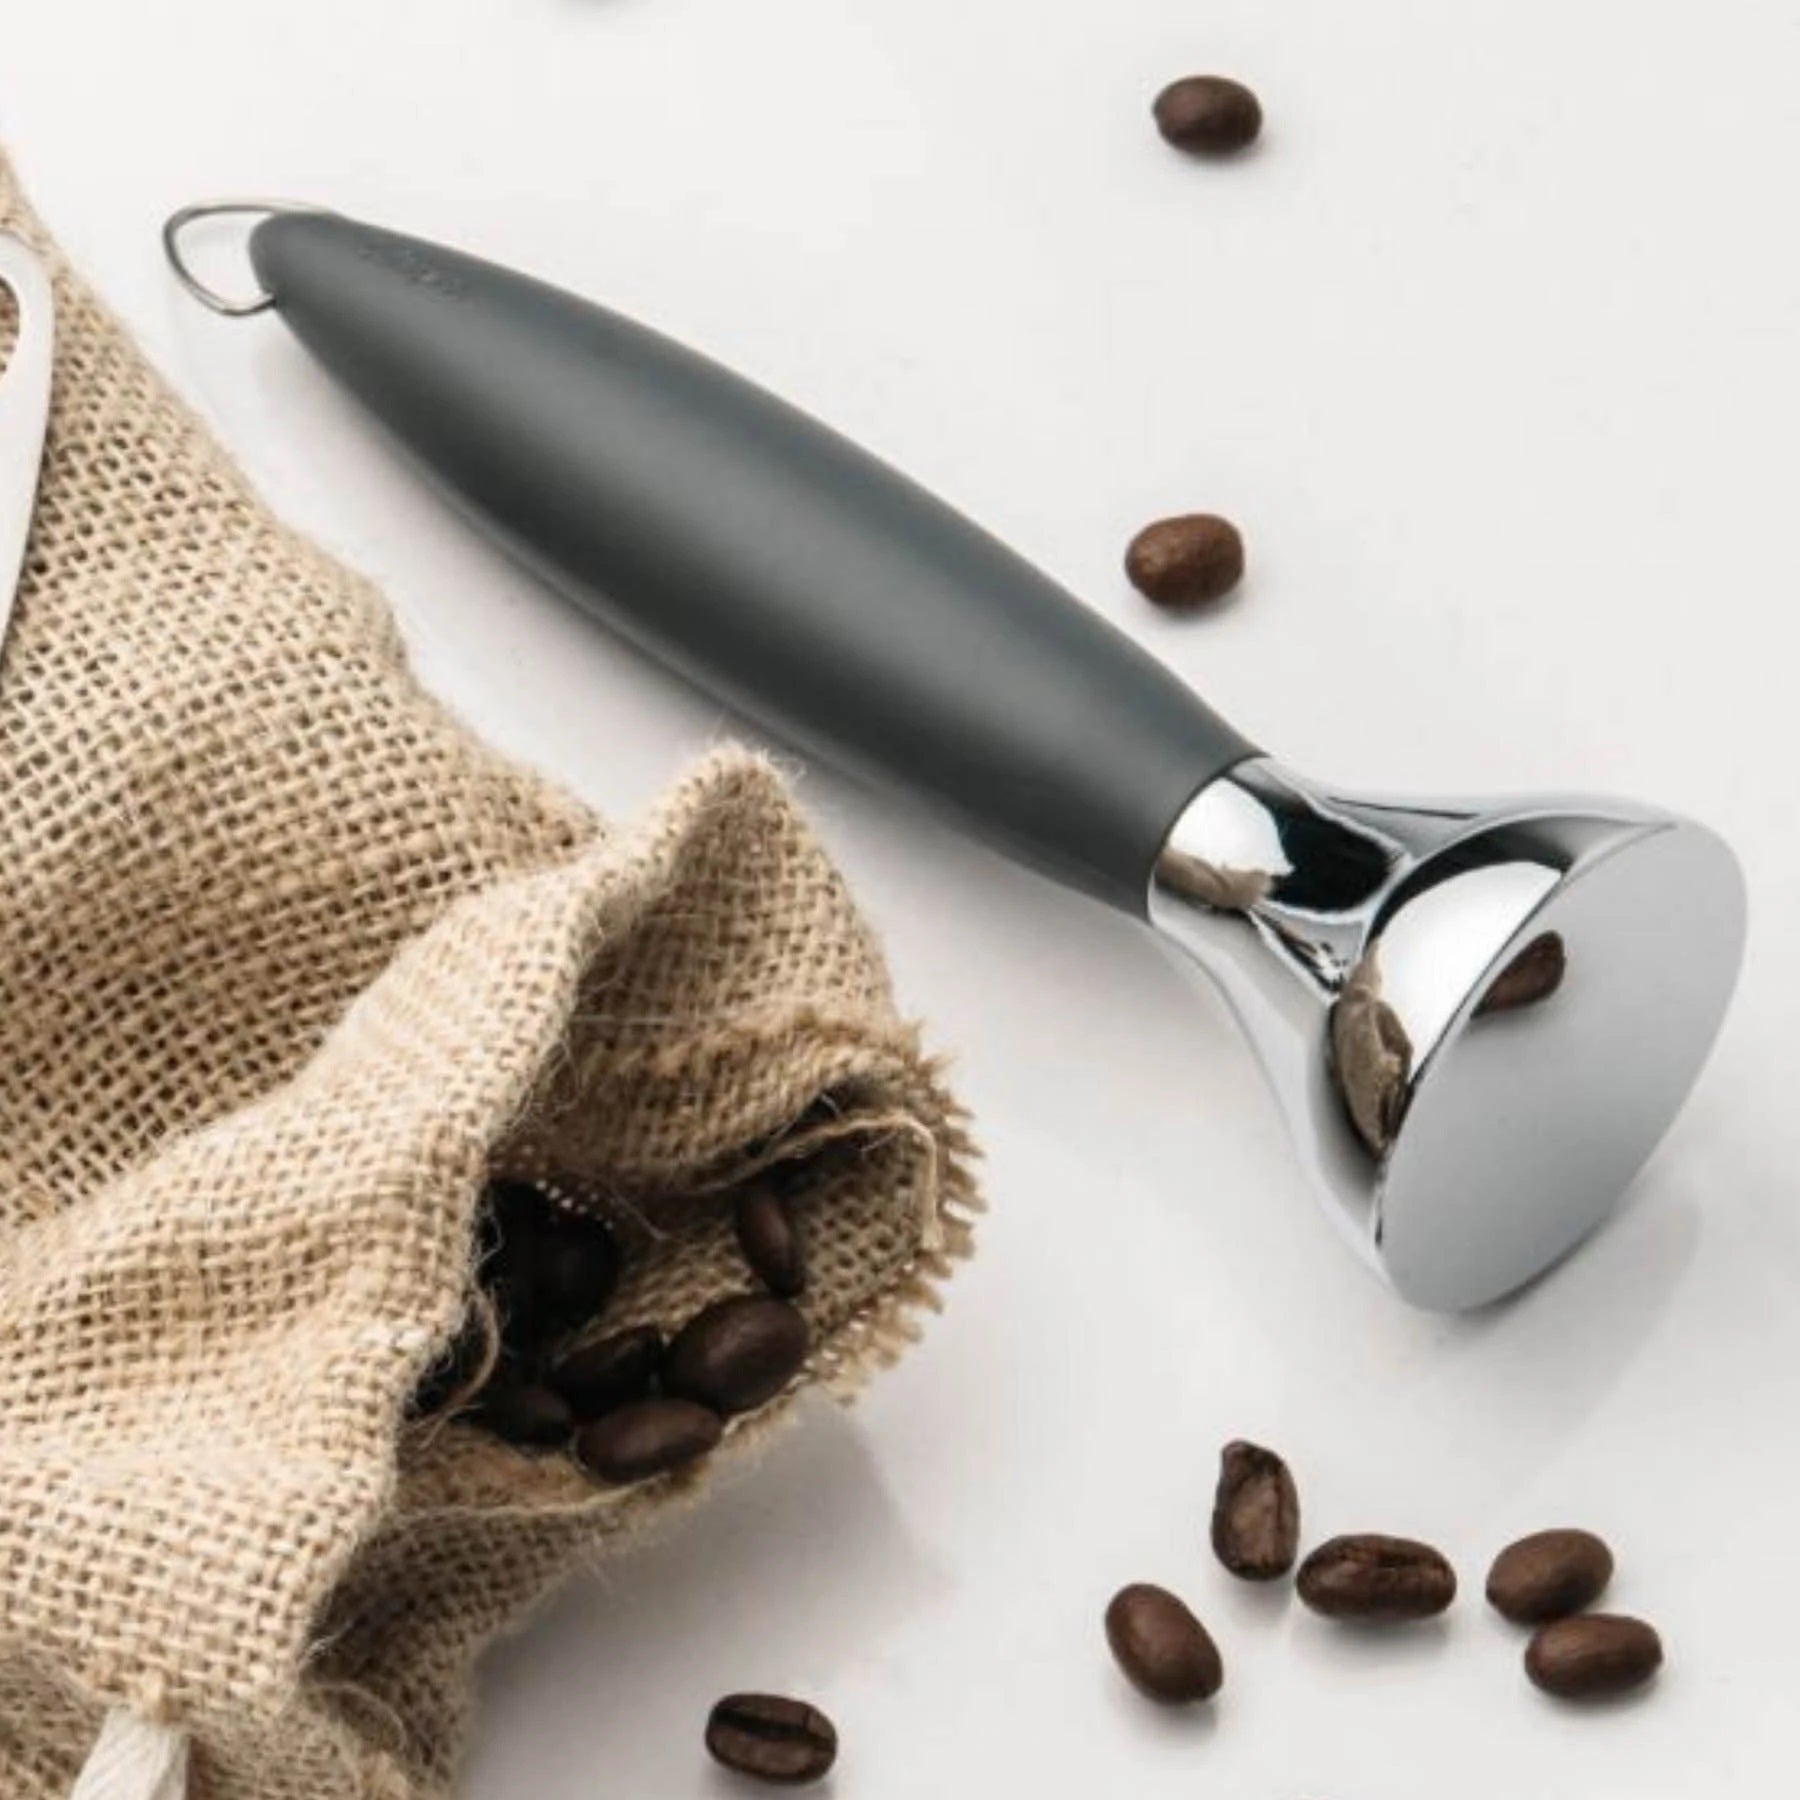 Cuisipro - Coffee Tamper